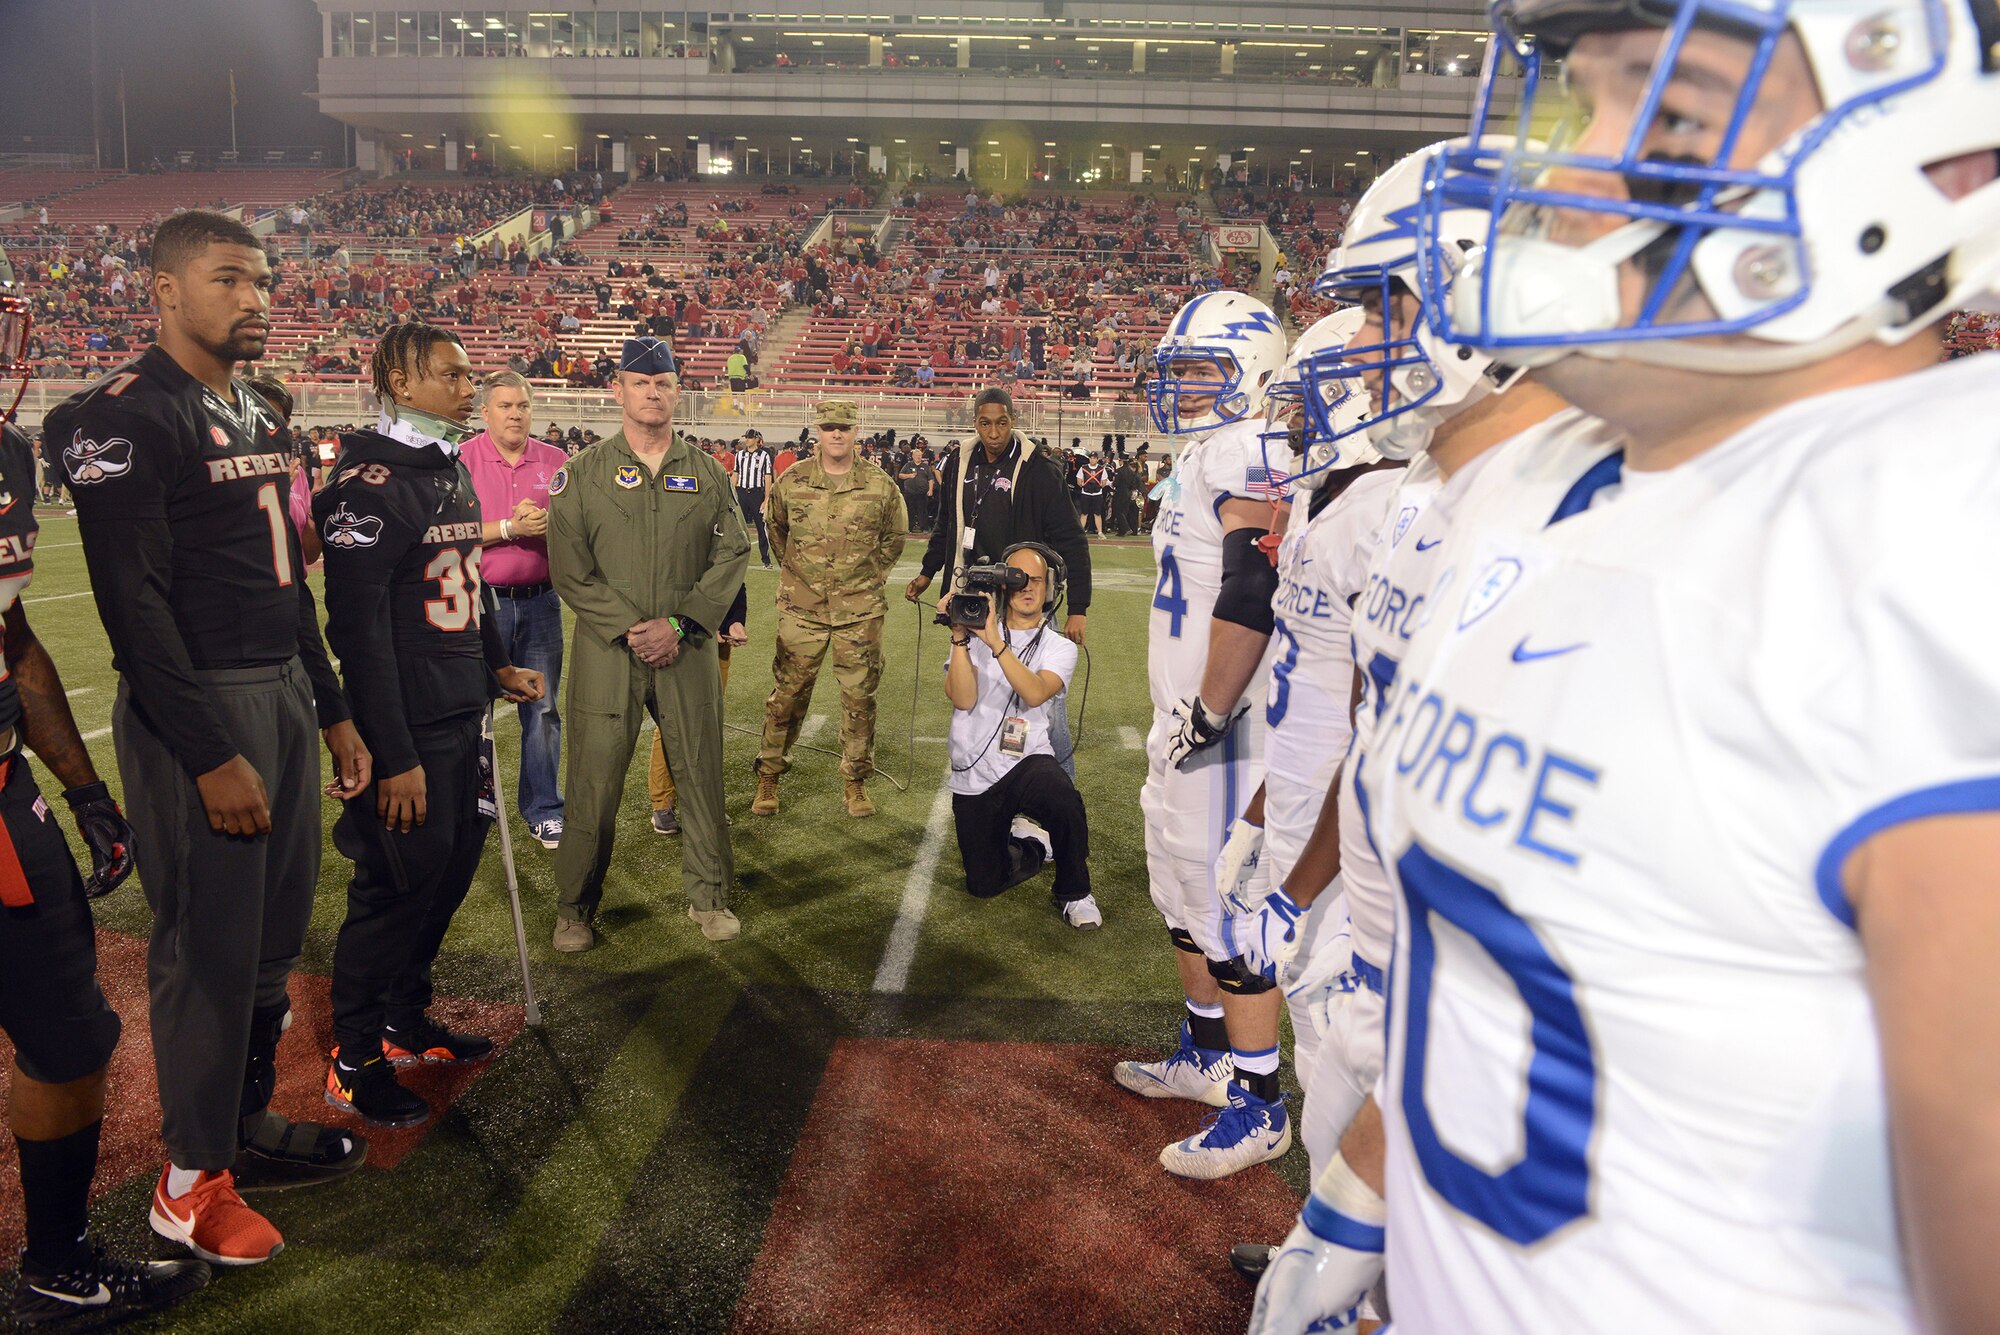 Now-retired Air Force Reserve Brig. Gen. Christian Funk served as the honorary captain for the Air Force Academy during a Falcons football game, Oct. 19, 2018. To his left is Chief Master Sgt. Michael Johnson, Air Force Recruiting Service chief of strategic marketing. Johnson and Funk began working sporting events in the Miami area when they were both assigned to Homestead Air Reserve Base, Florida.